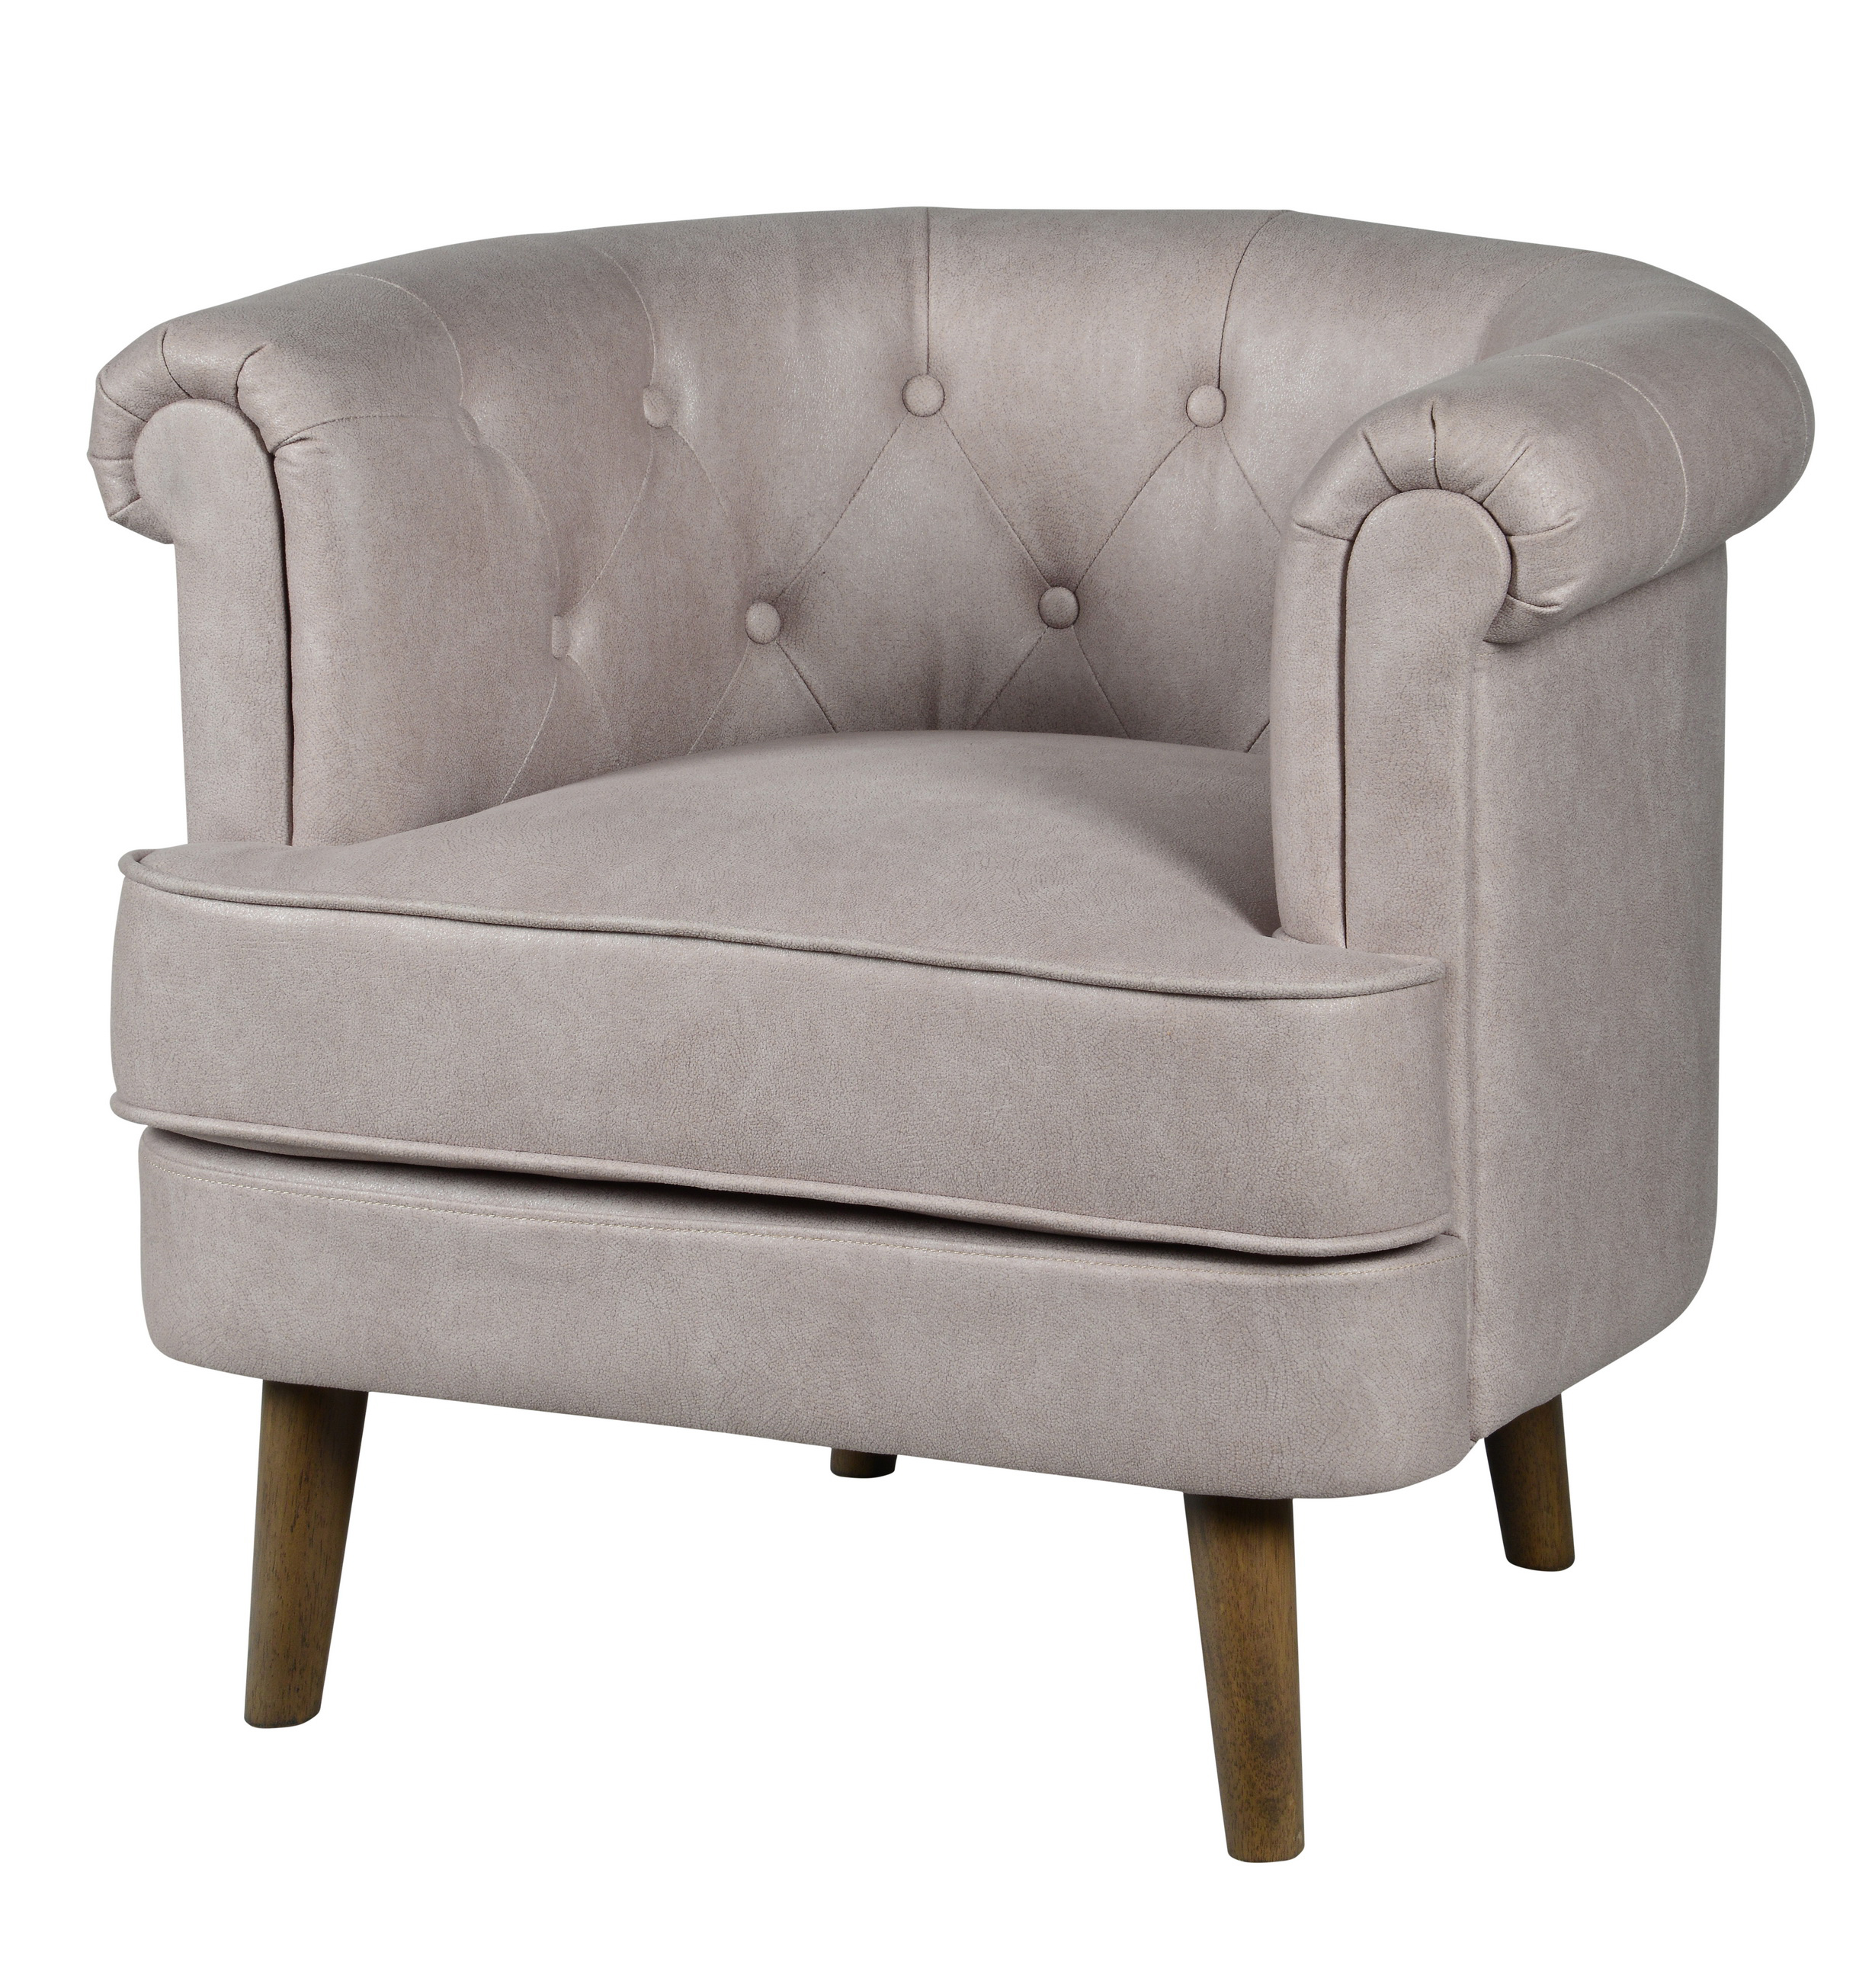 Forty West Meghan tufted chair